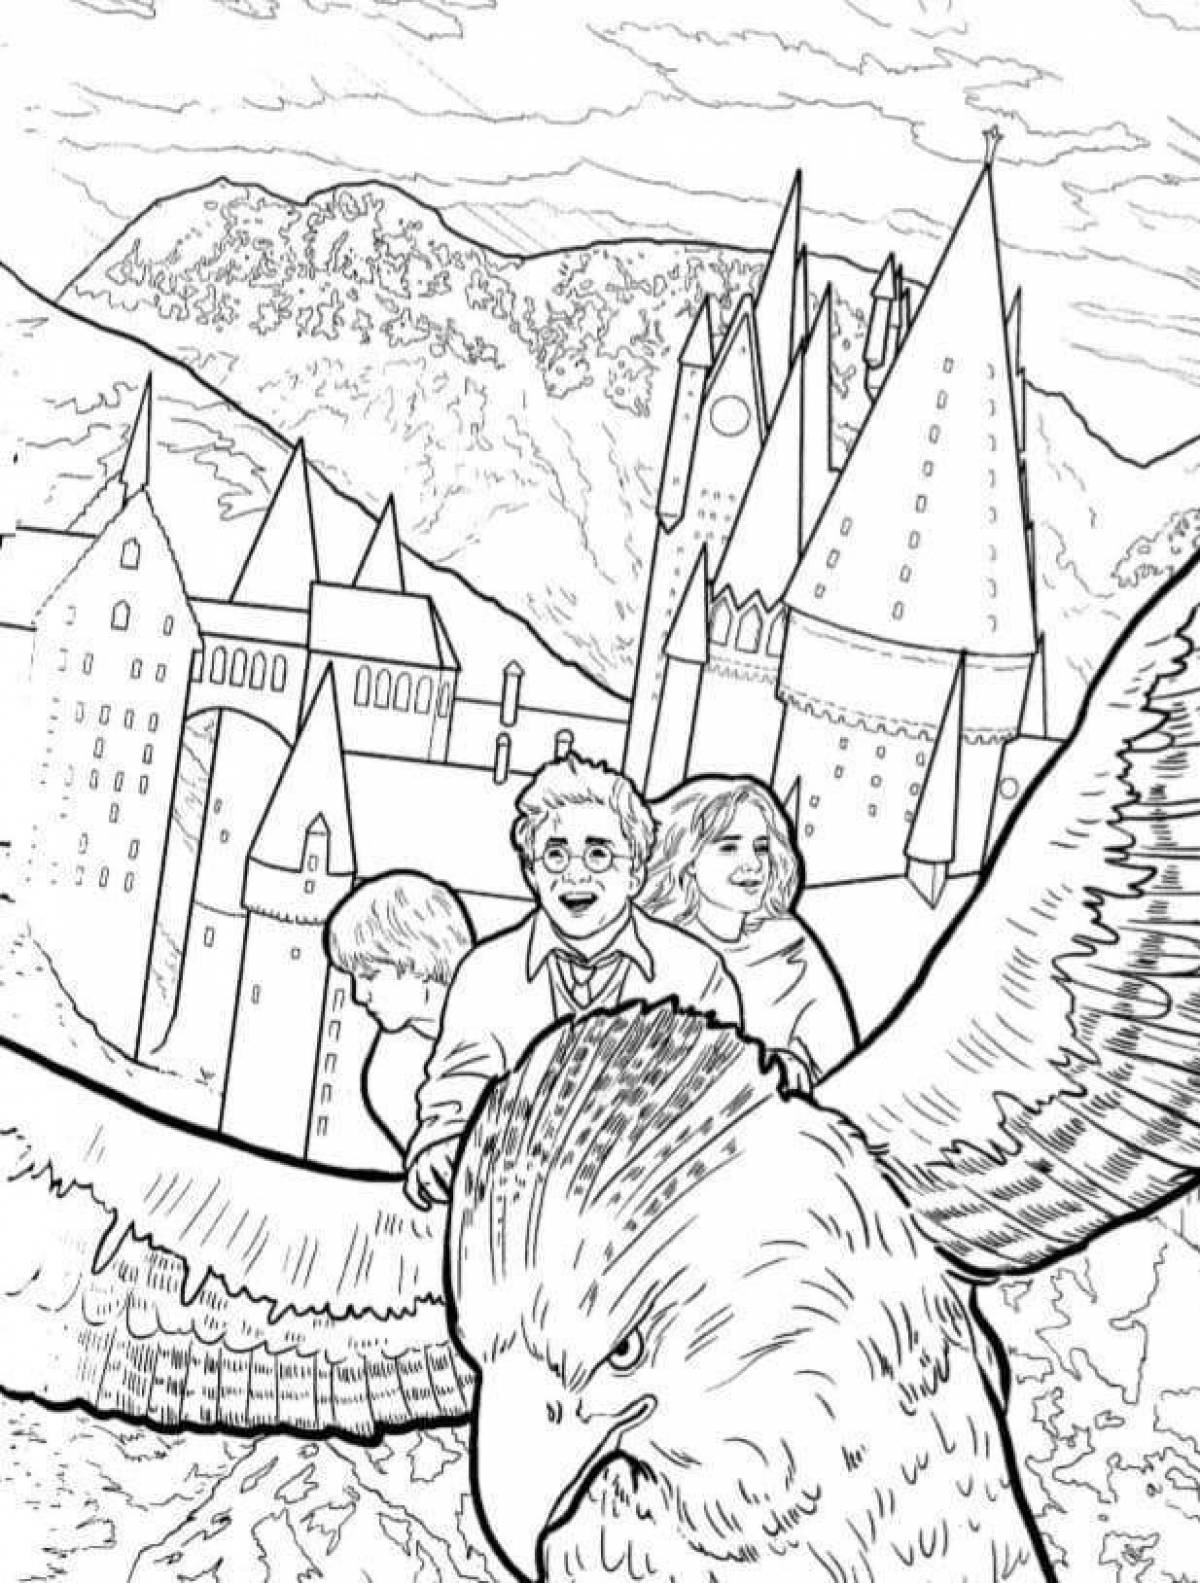 Amazing harry potter antistress coloring book